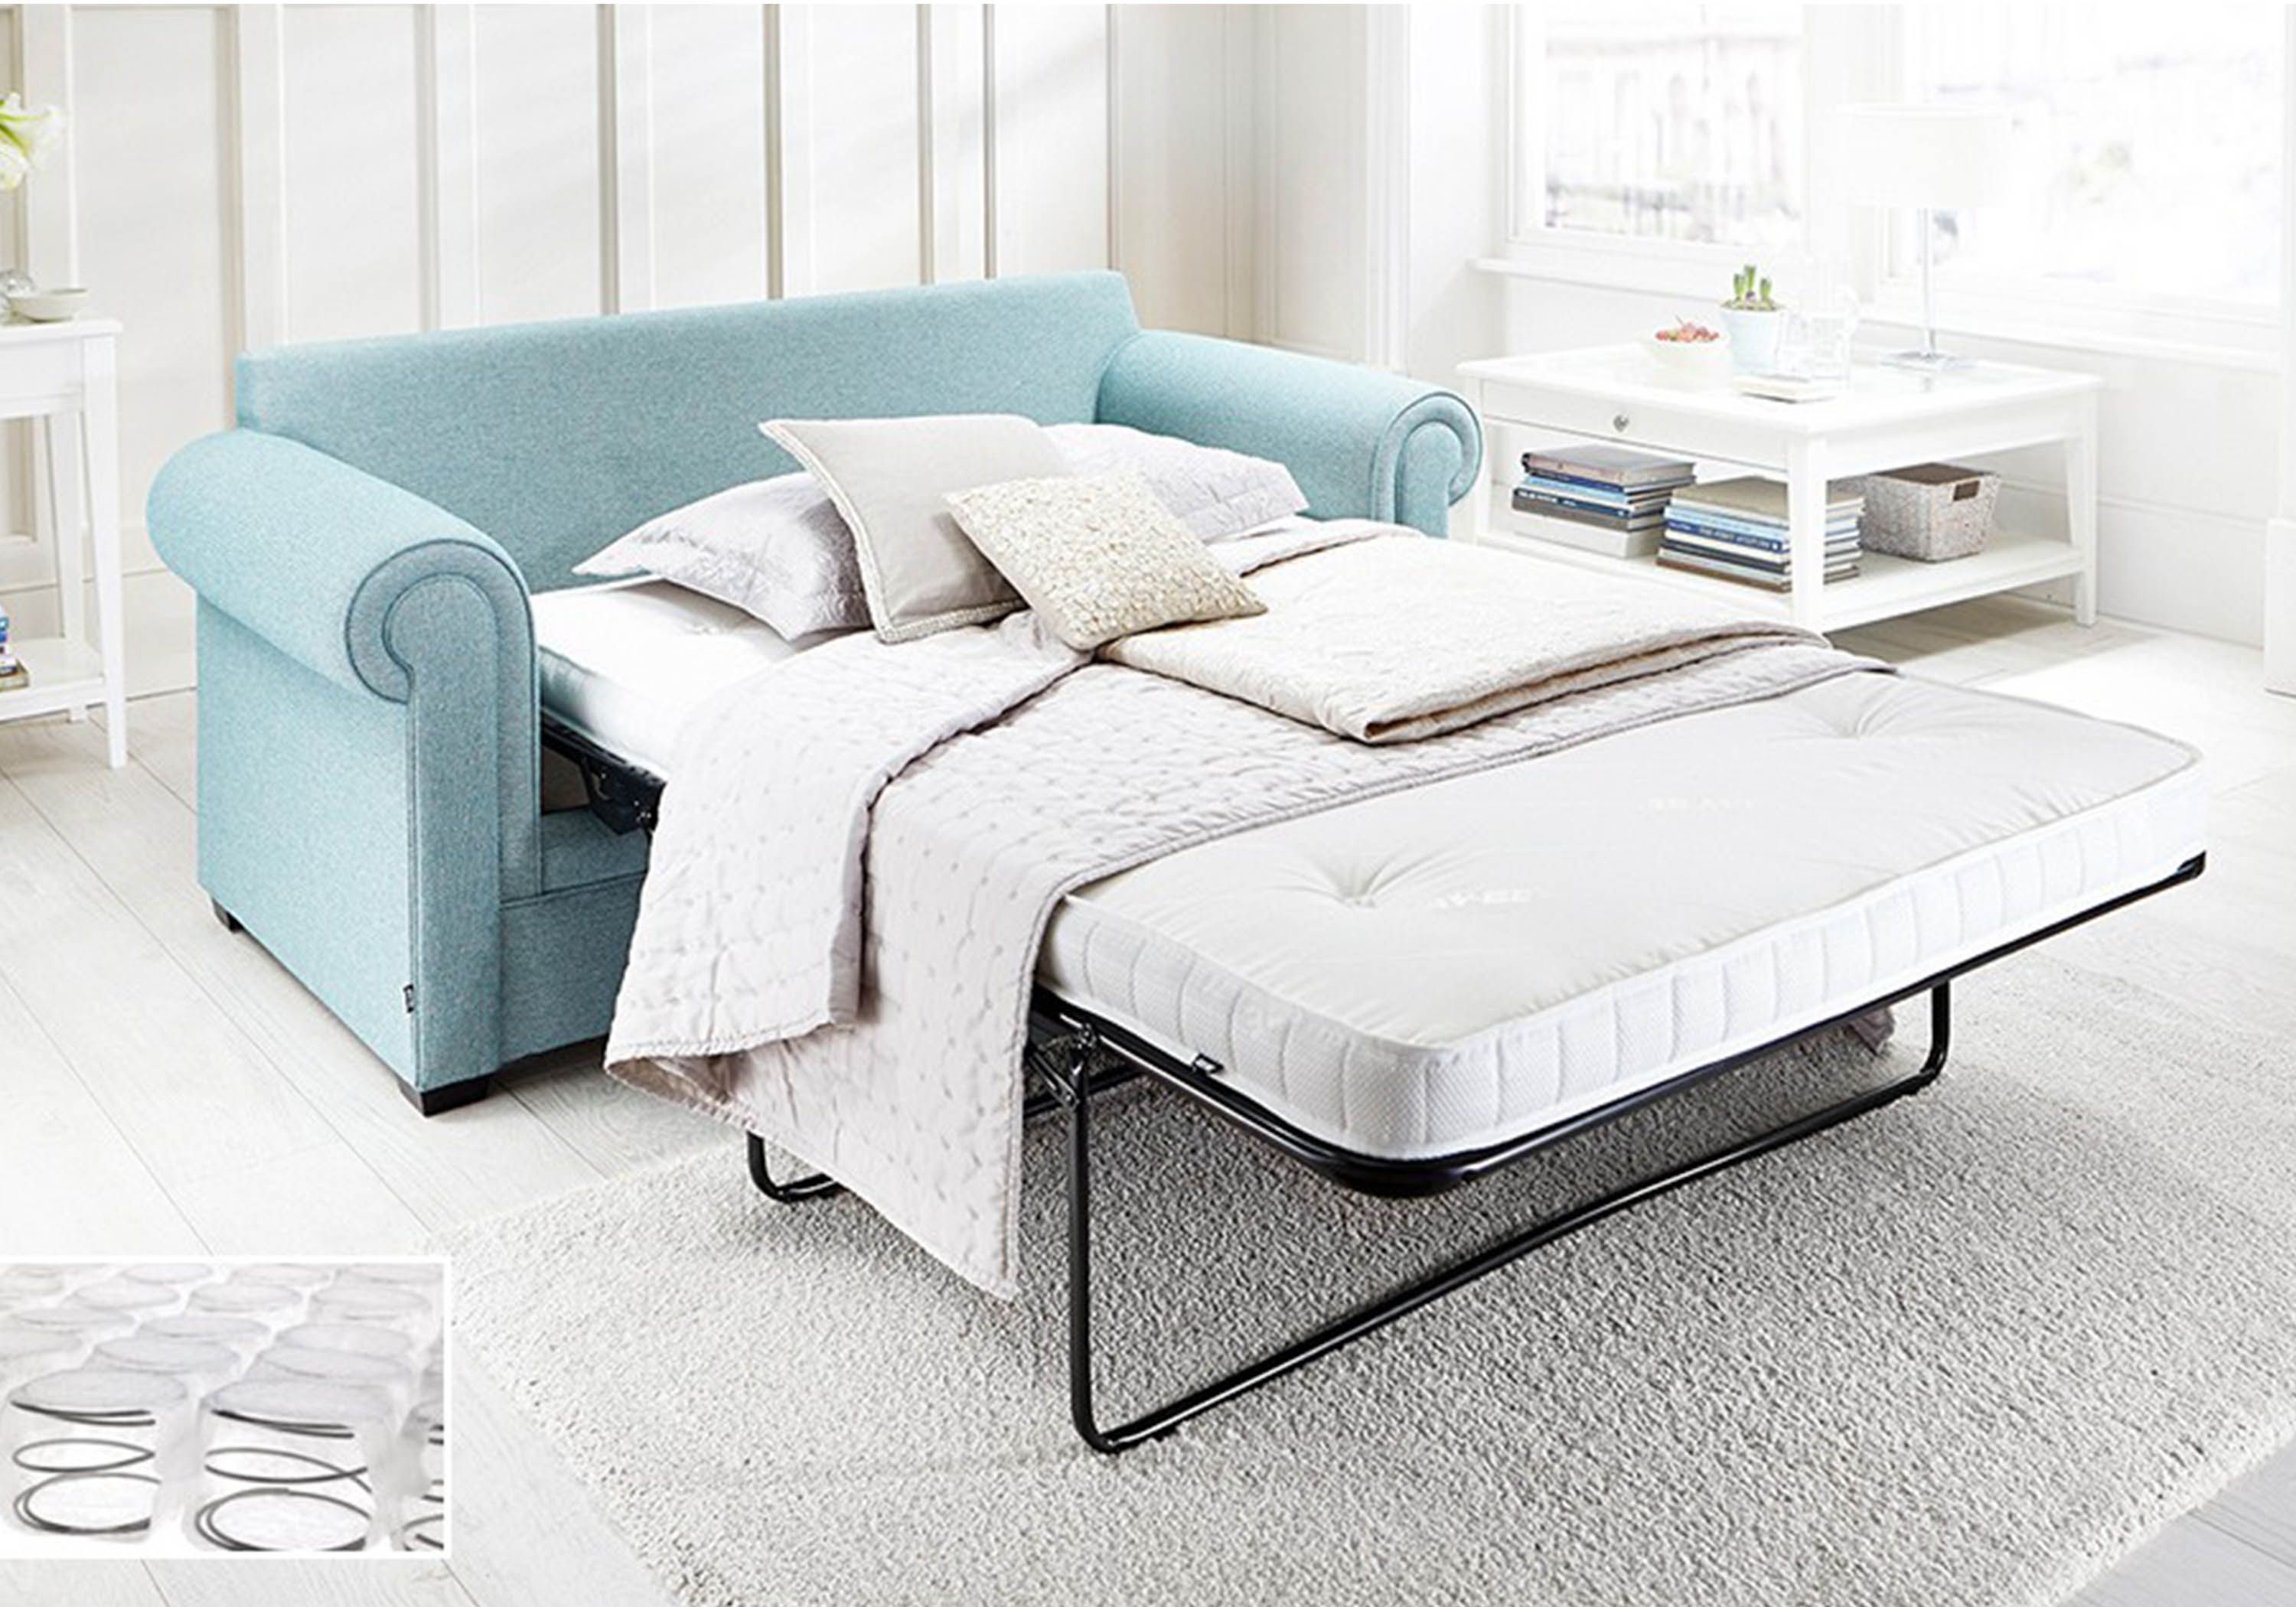 pocket sprung double sofa bed